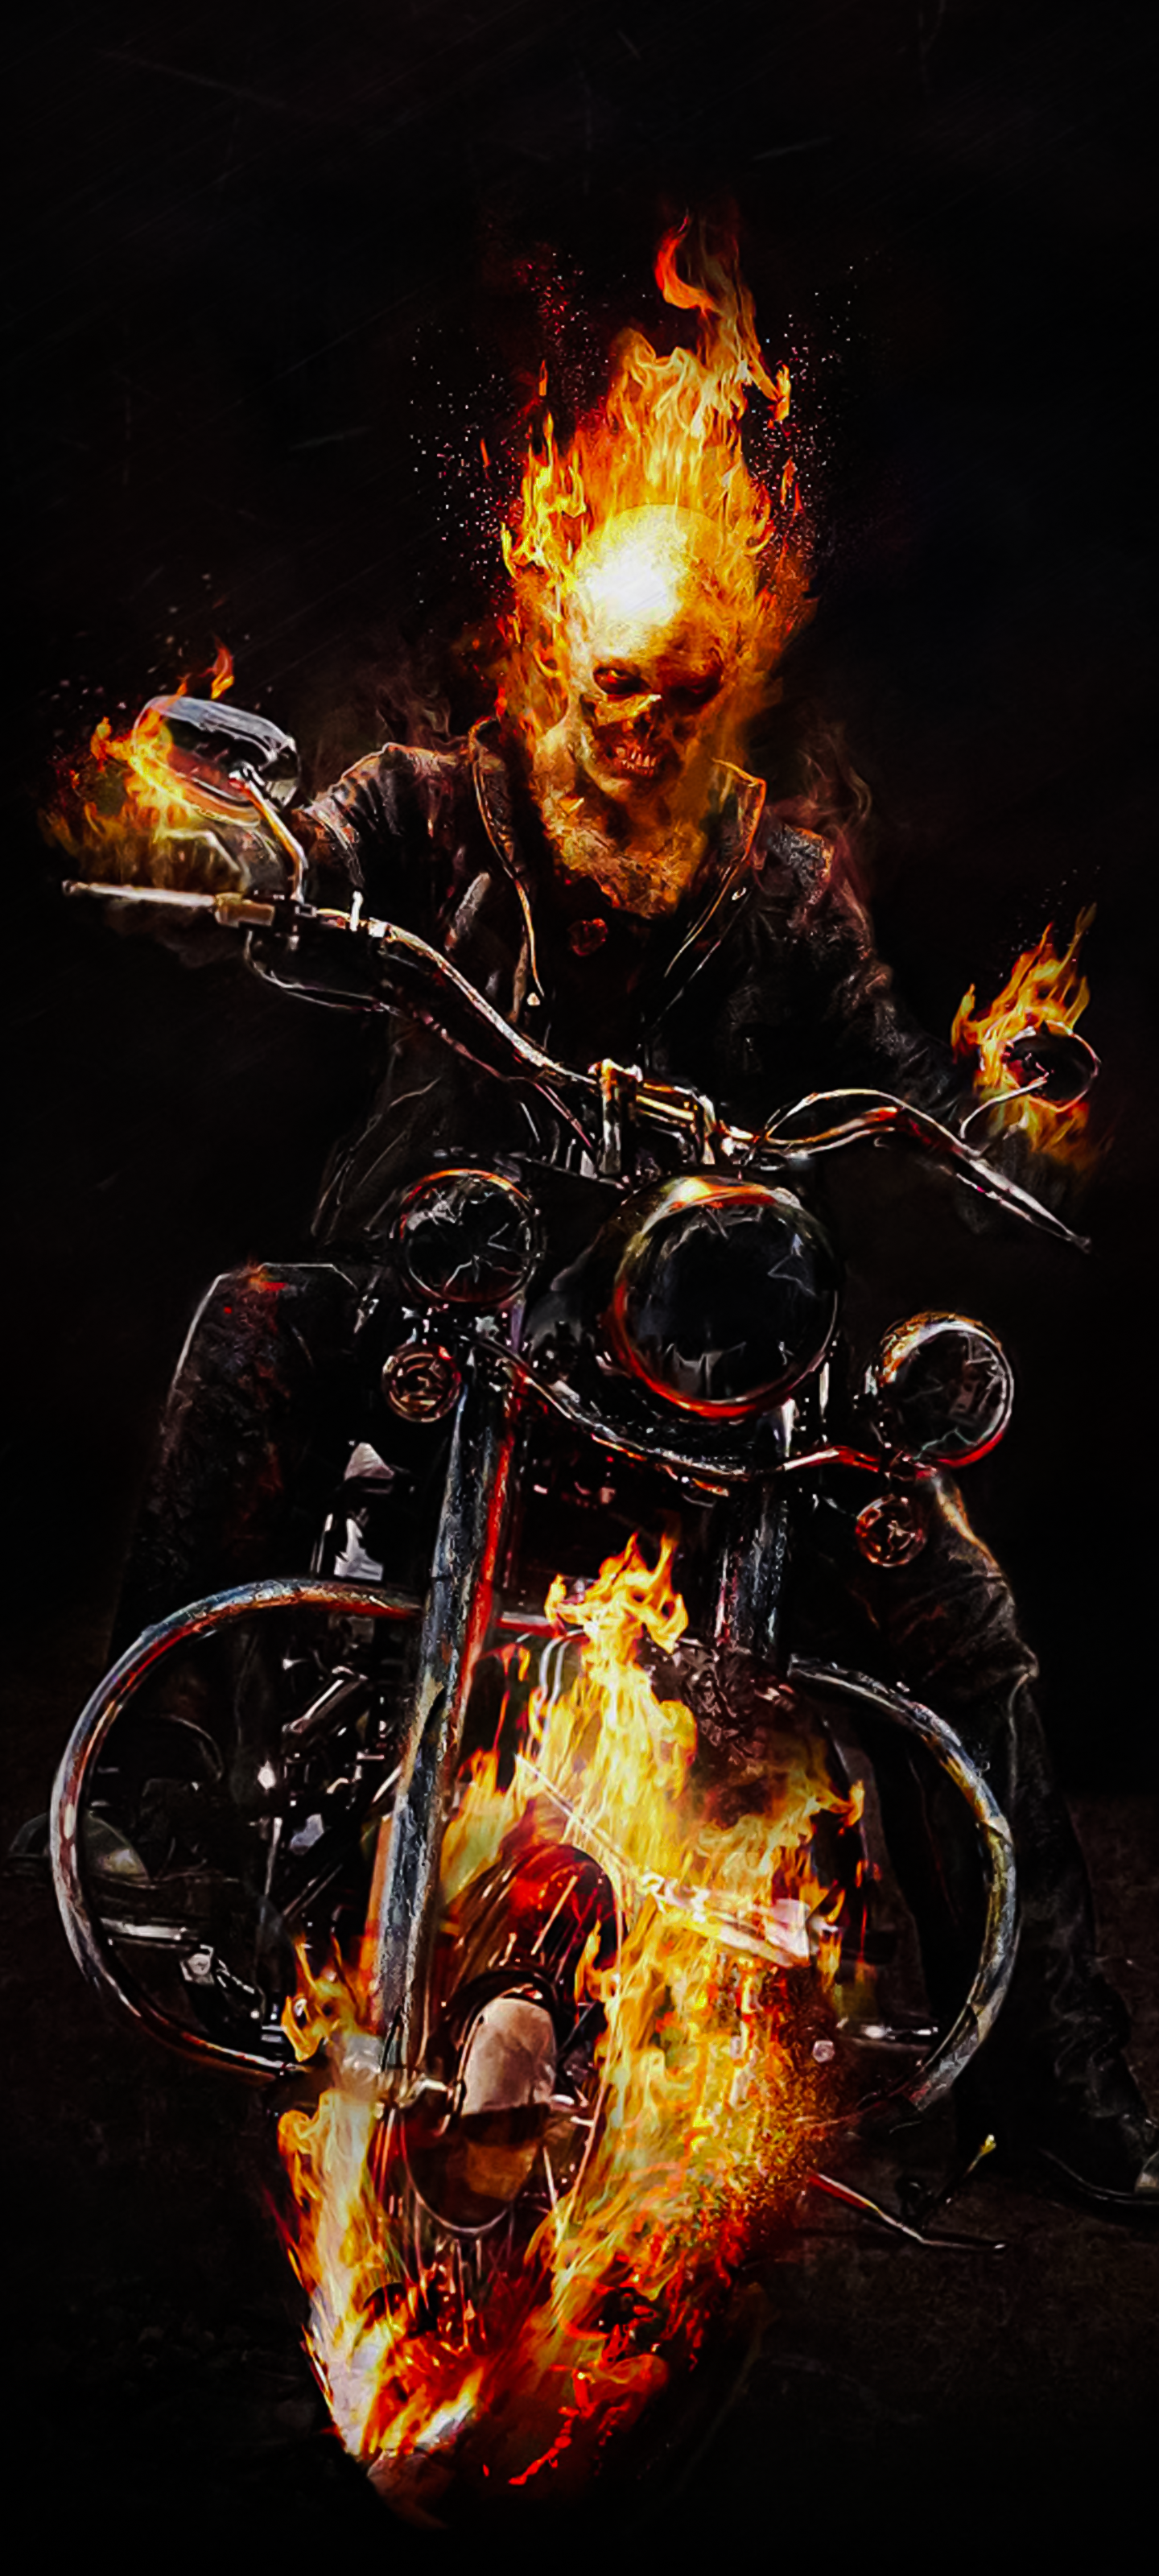 Mobile Wallpaper #Wallpaper of the Day-2022.2.10Chu Ghost Rider ( GhostRider) is the superhero code name of Marvel Comics, the protagonist